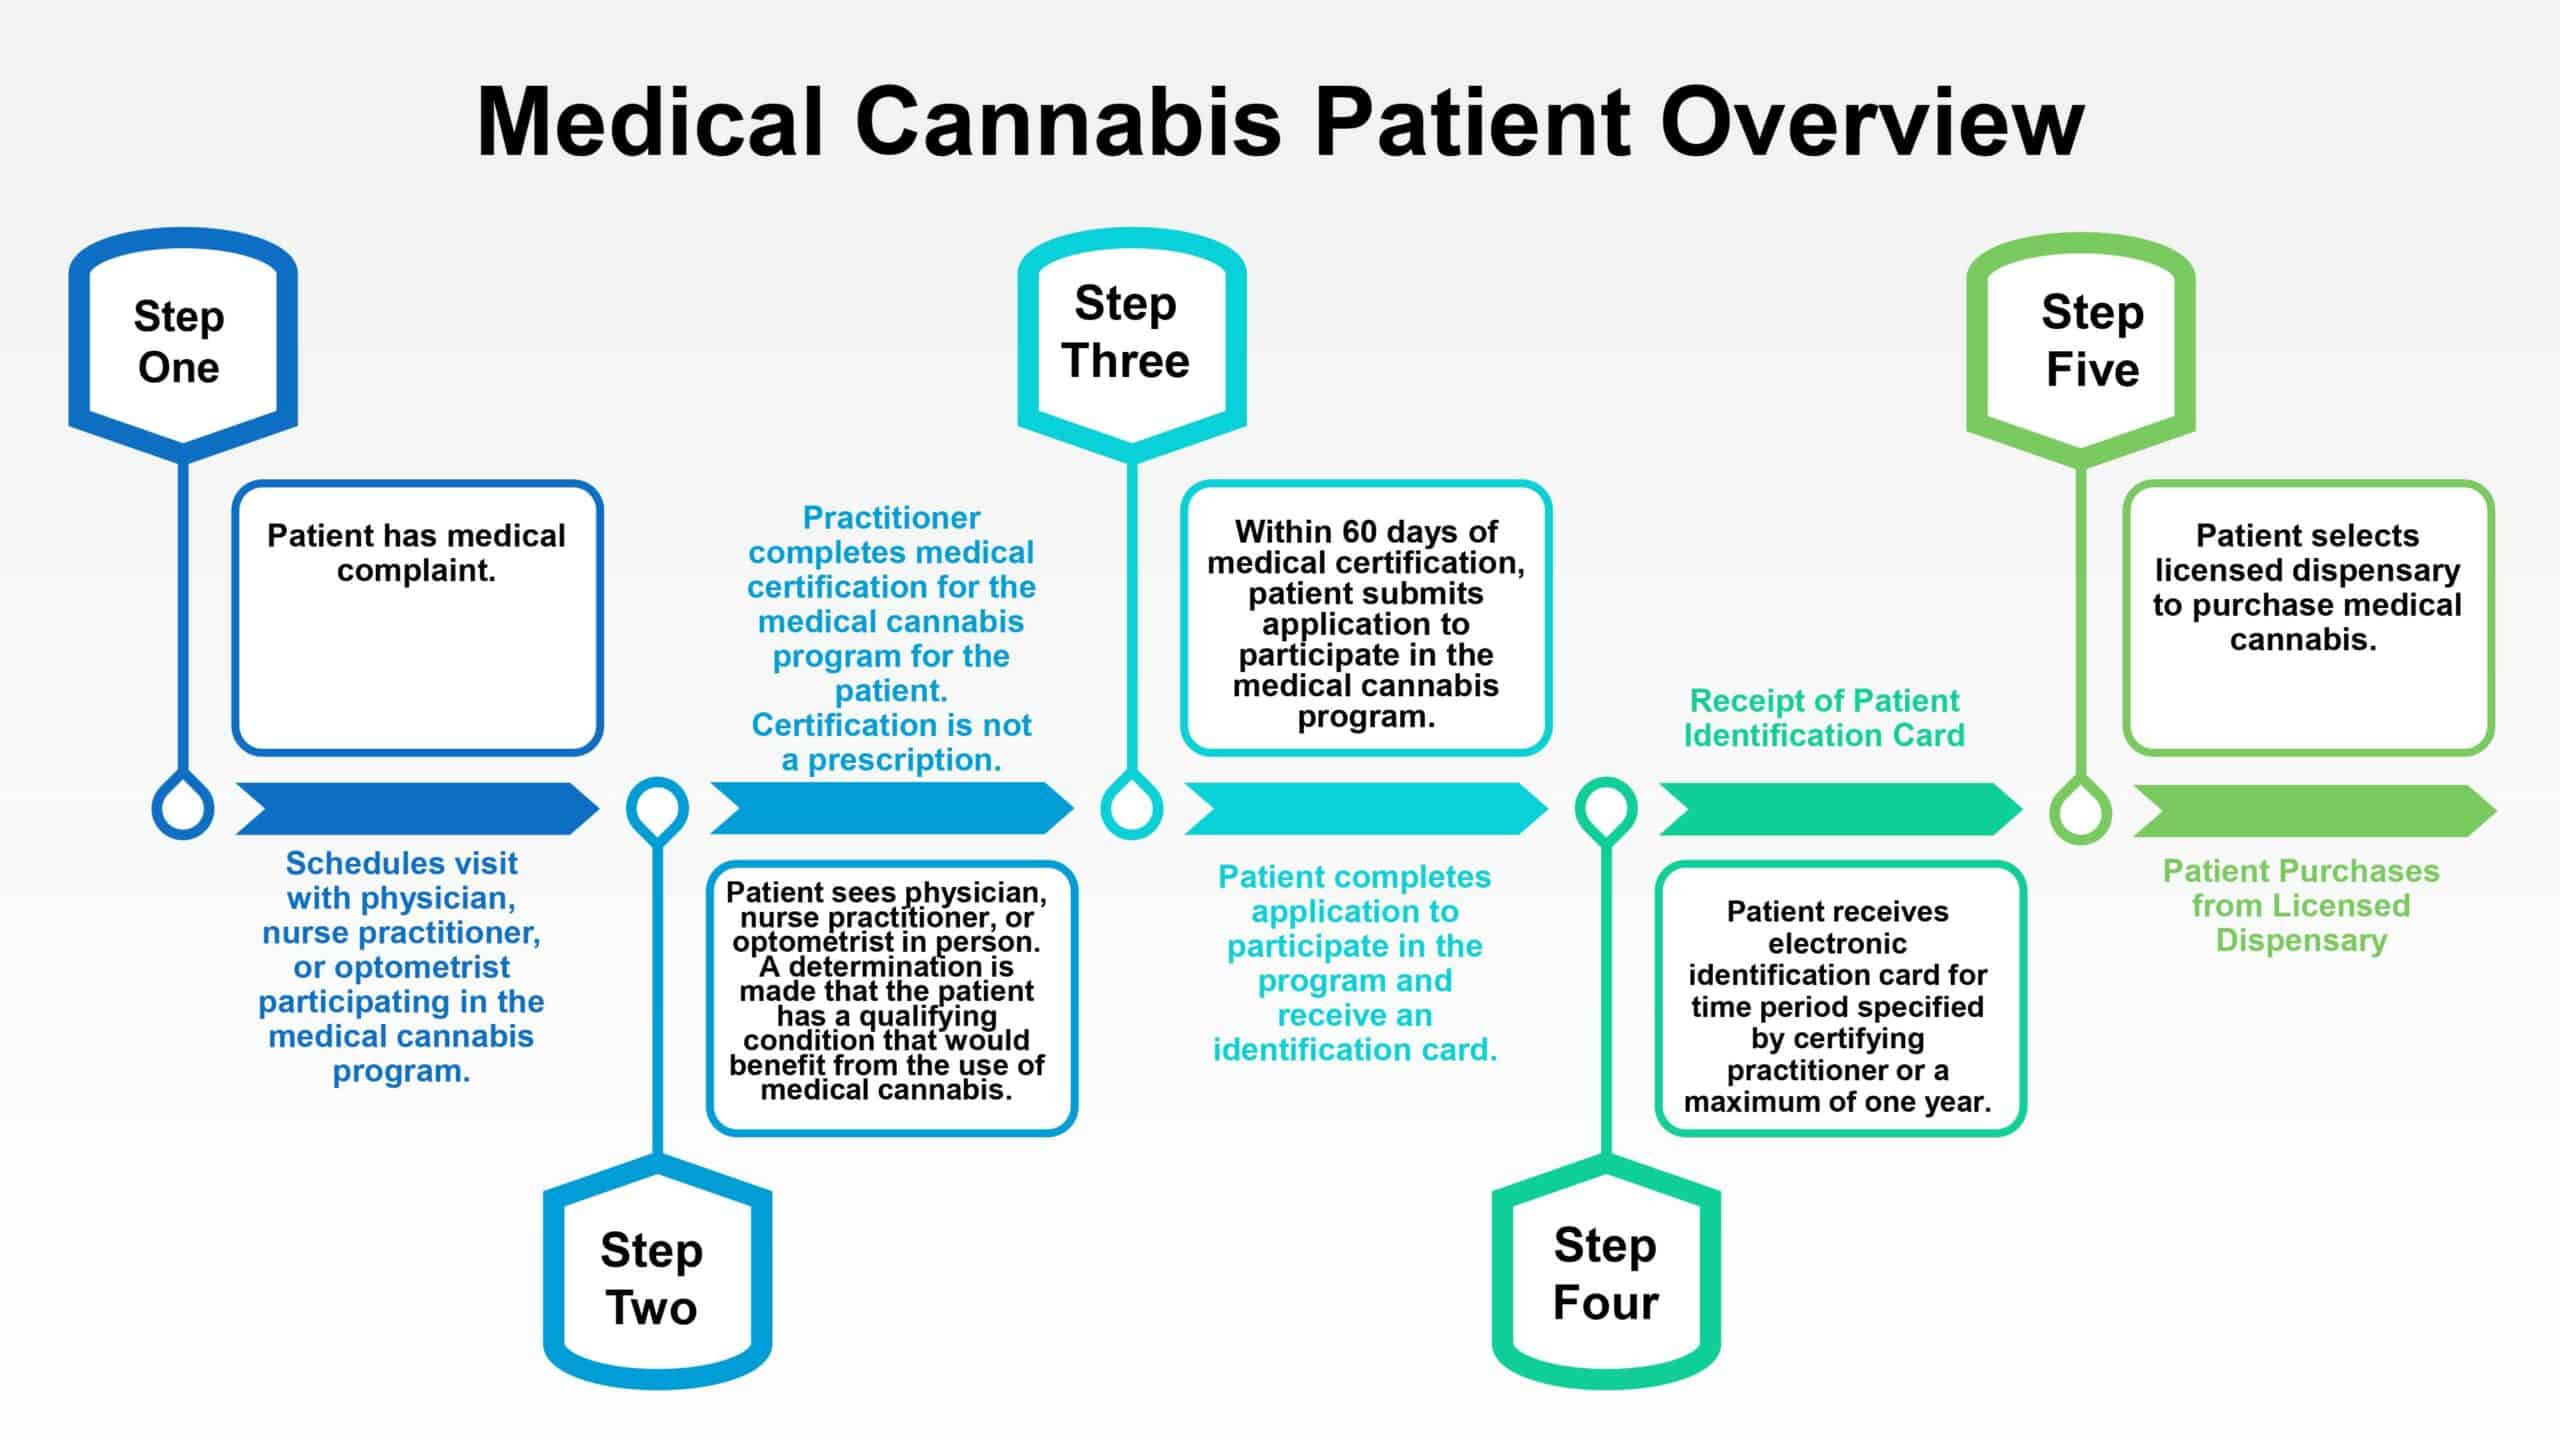 Mississippi Medical Card - Cannabis Patient Process Overview